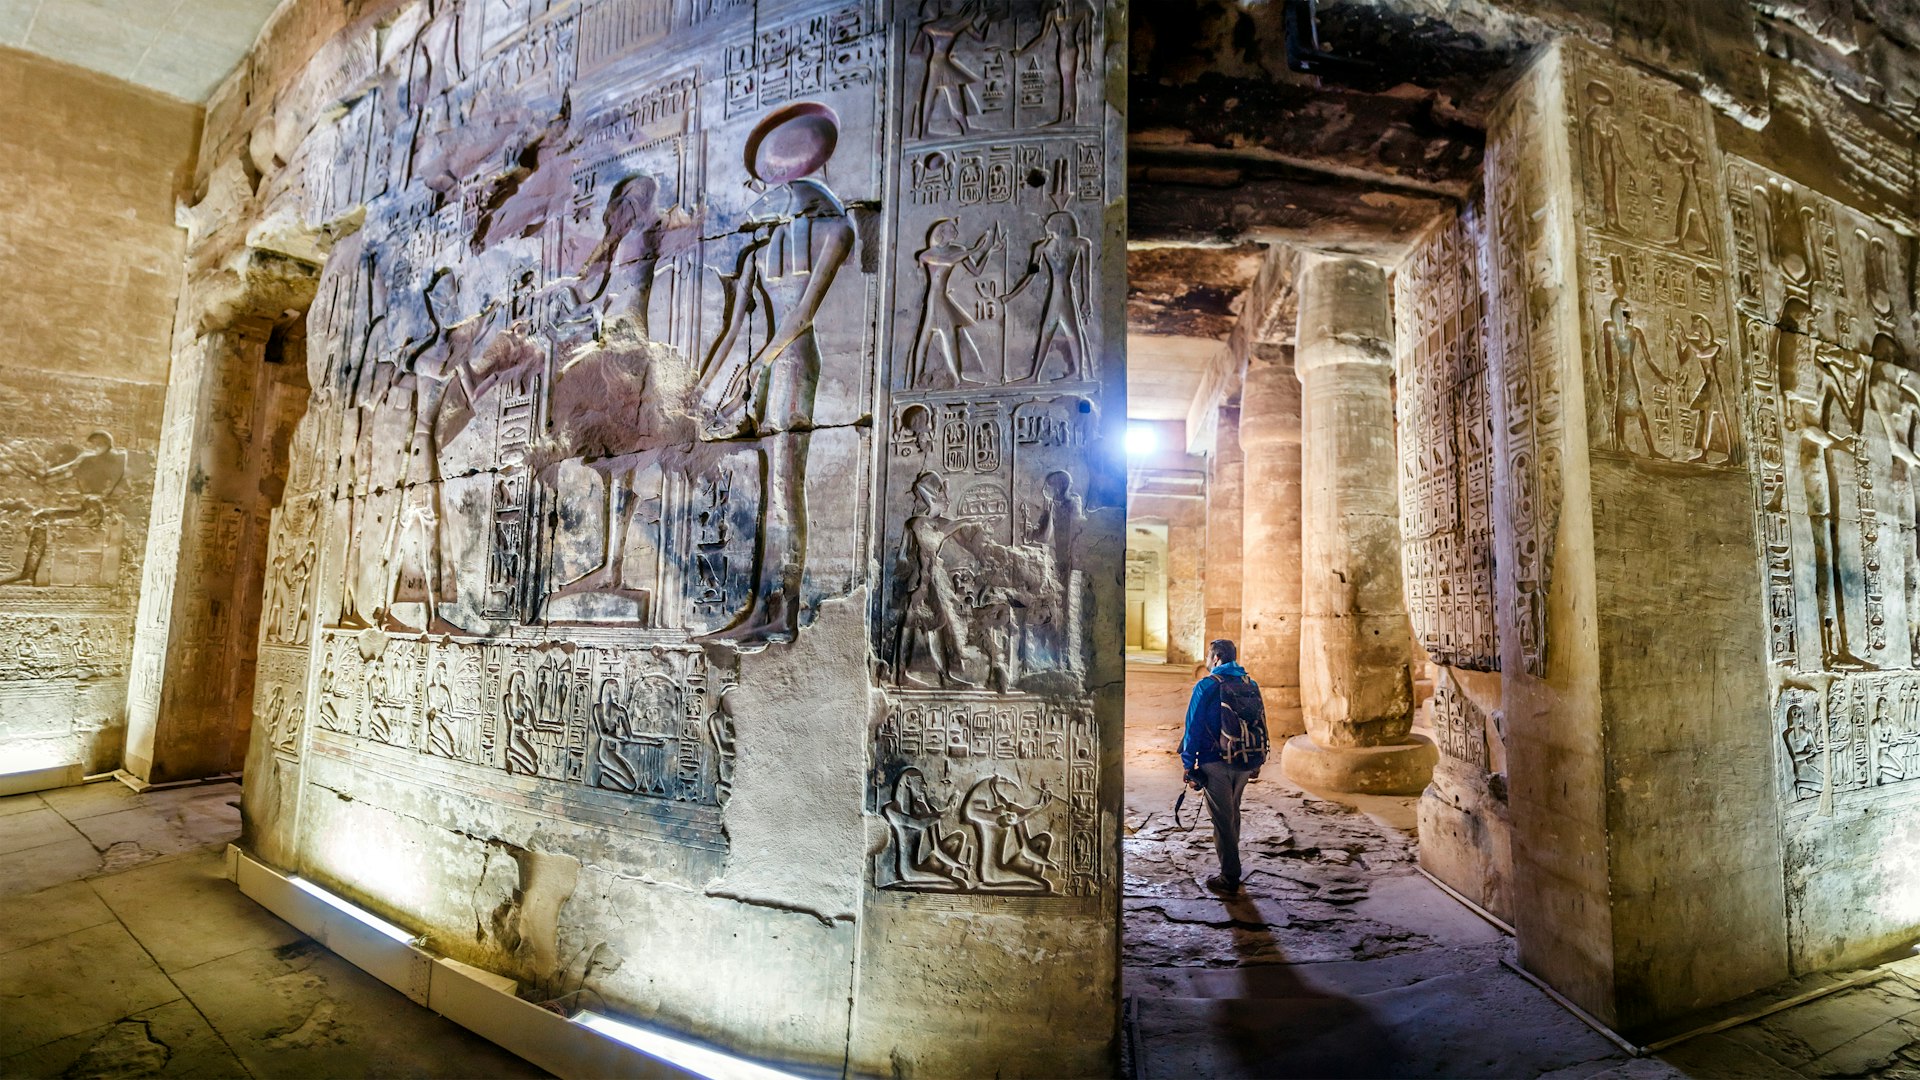 Detailed relief hieroglyps on a temple wall as a person walks by